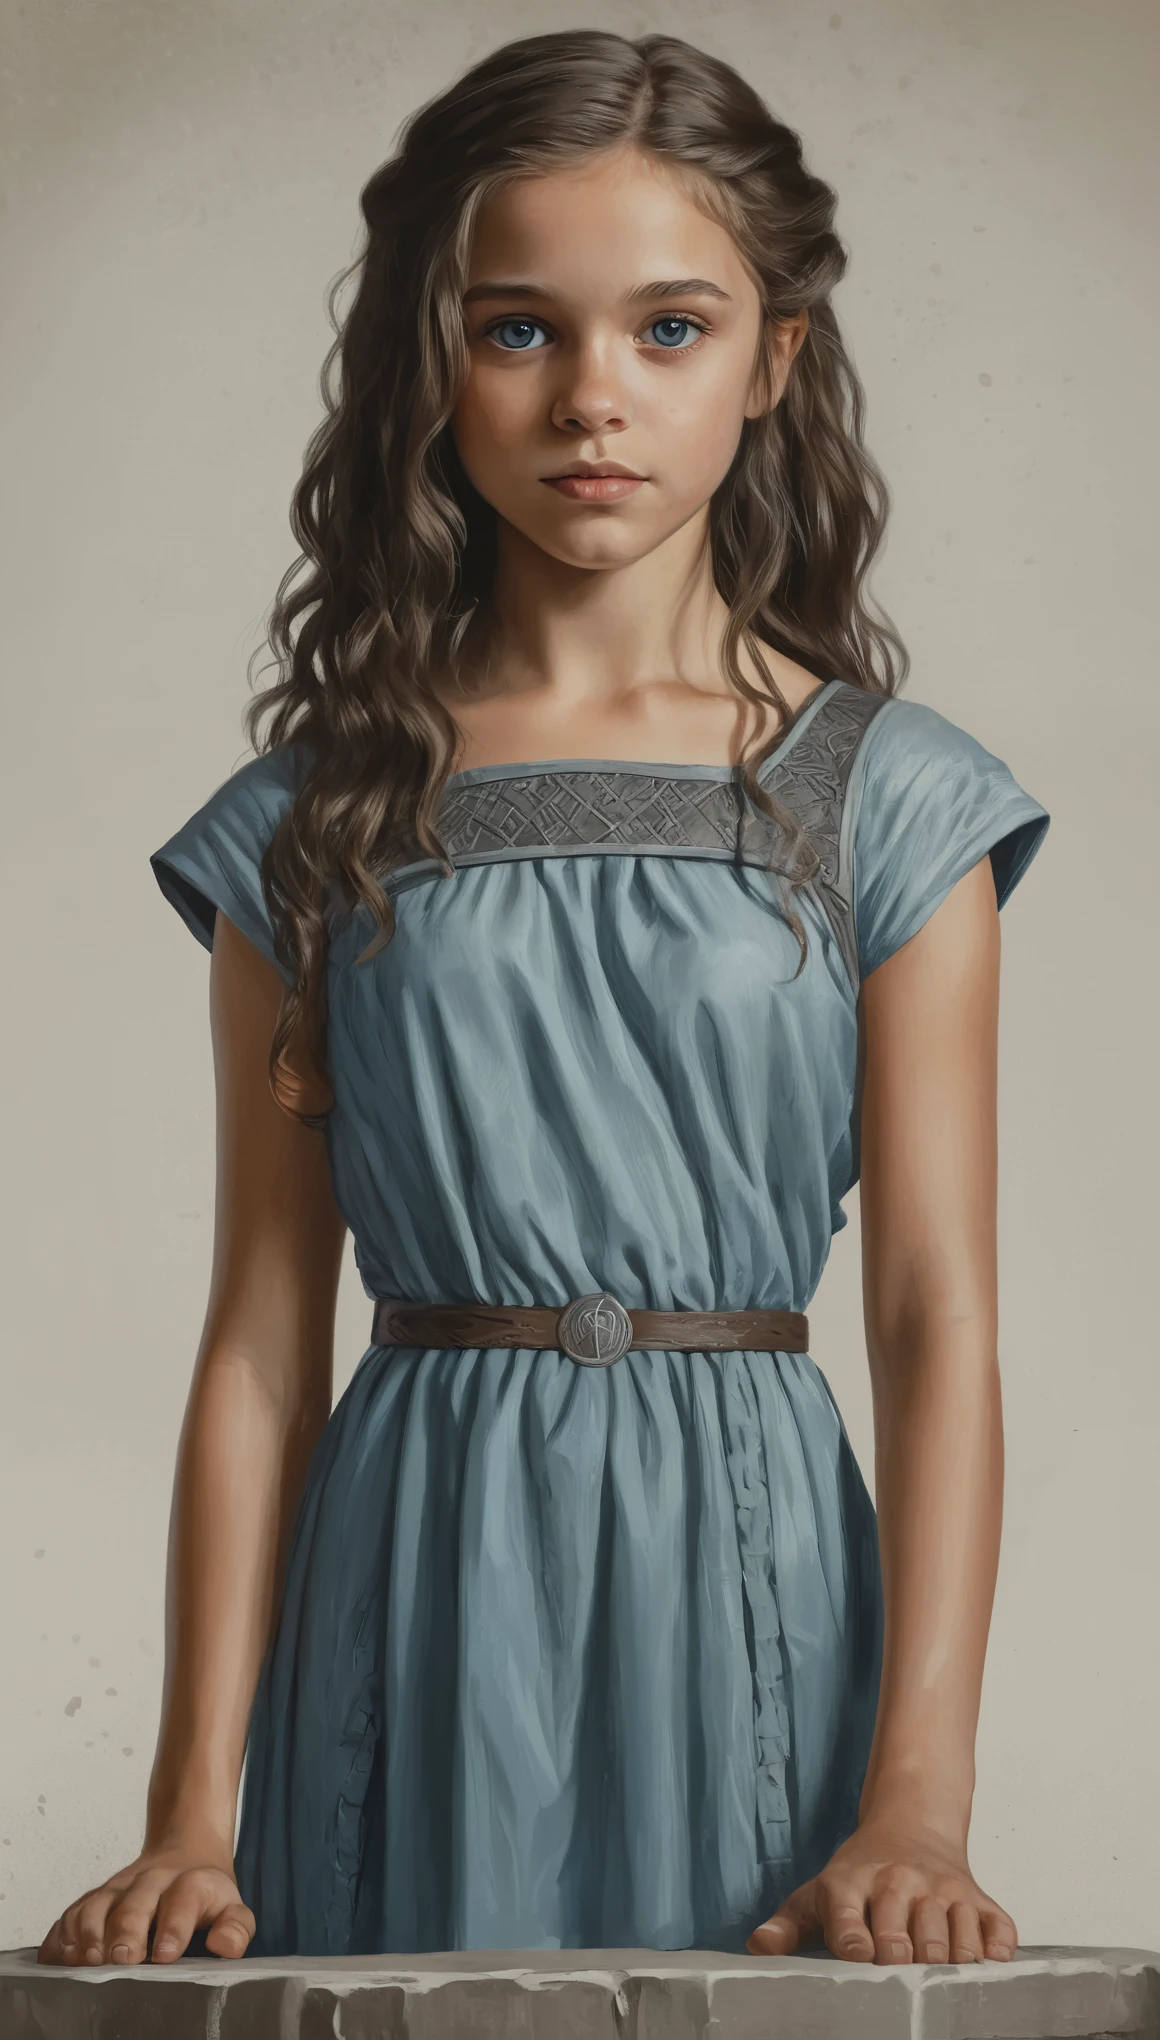 An illustrated movie poster, hand-drawn, full color, a young girl, wearing a black chiton, warm brown complexion, pale blue eyes, ashy hair, long loose curls, waist-length hair, posing on a pedestal, hard shadows, graphite shading, stencil marks, airbrushed acrylic paint, masterpiece, in the style of Game of Thrones